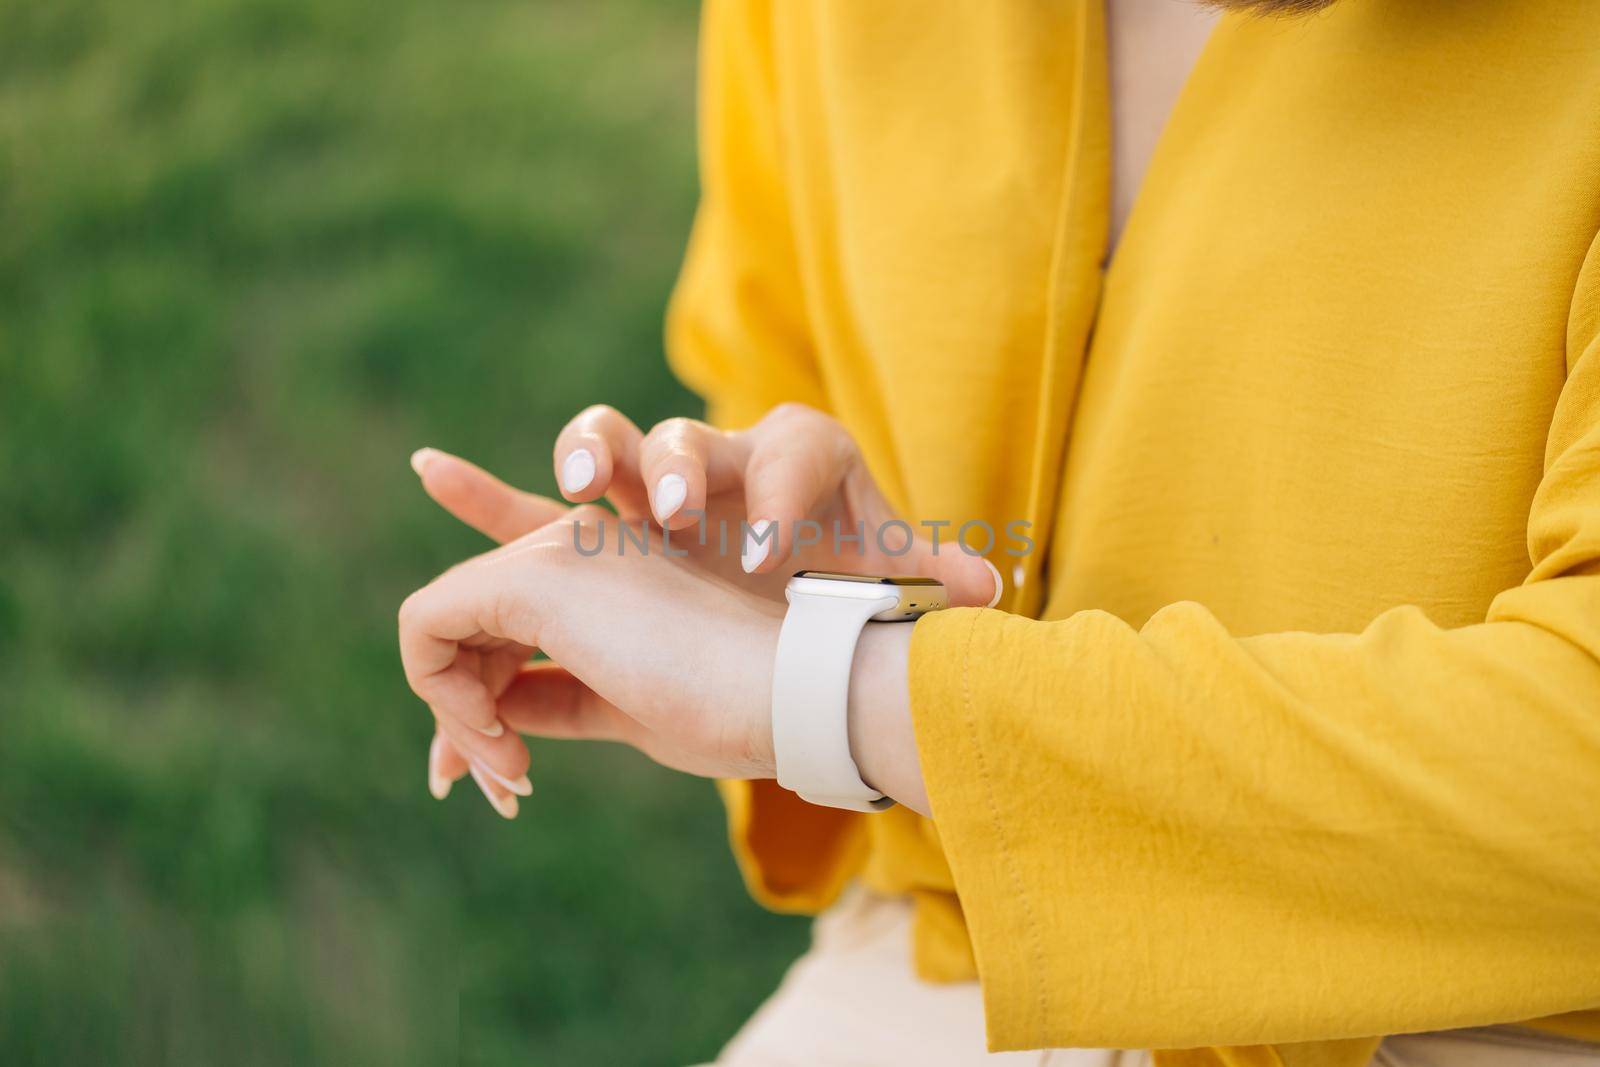 Smart watch on woman's hand outdoor. Woman's hand touching a smartwatch. Female's hand uses of wearable smart watch at outdoor by uflypro